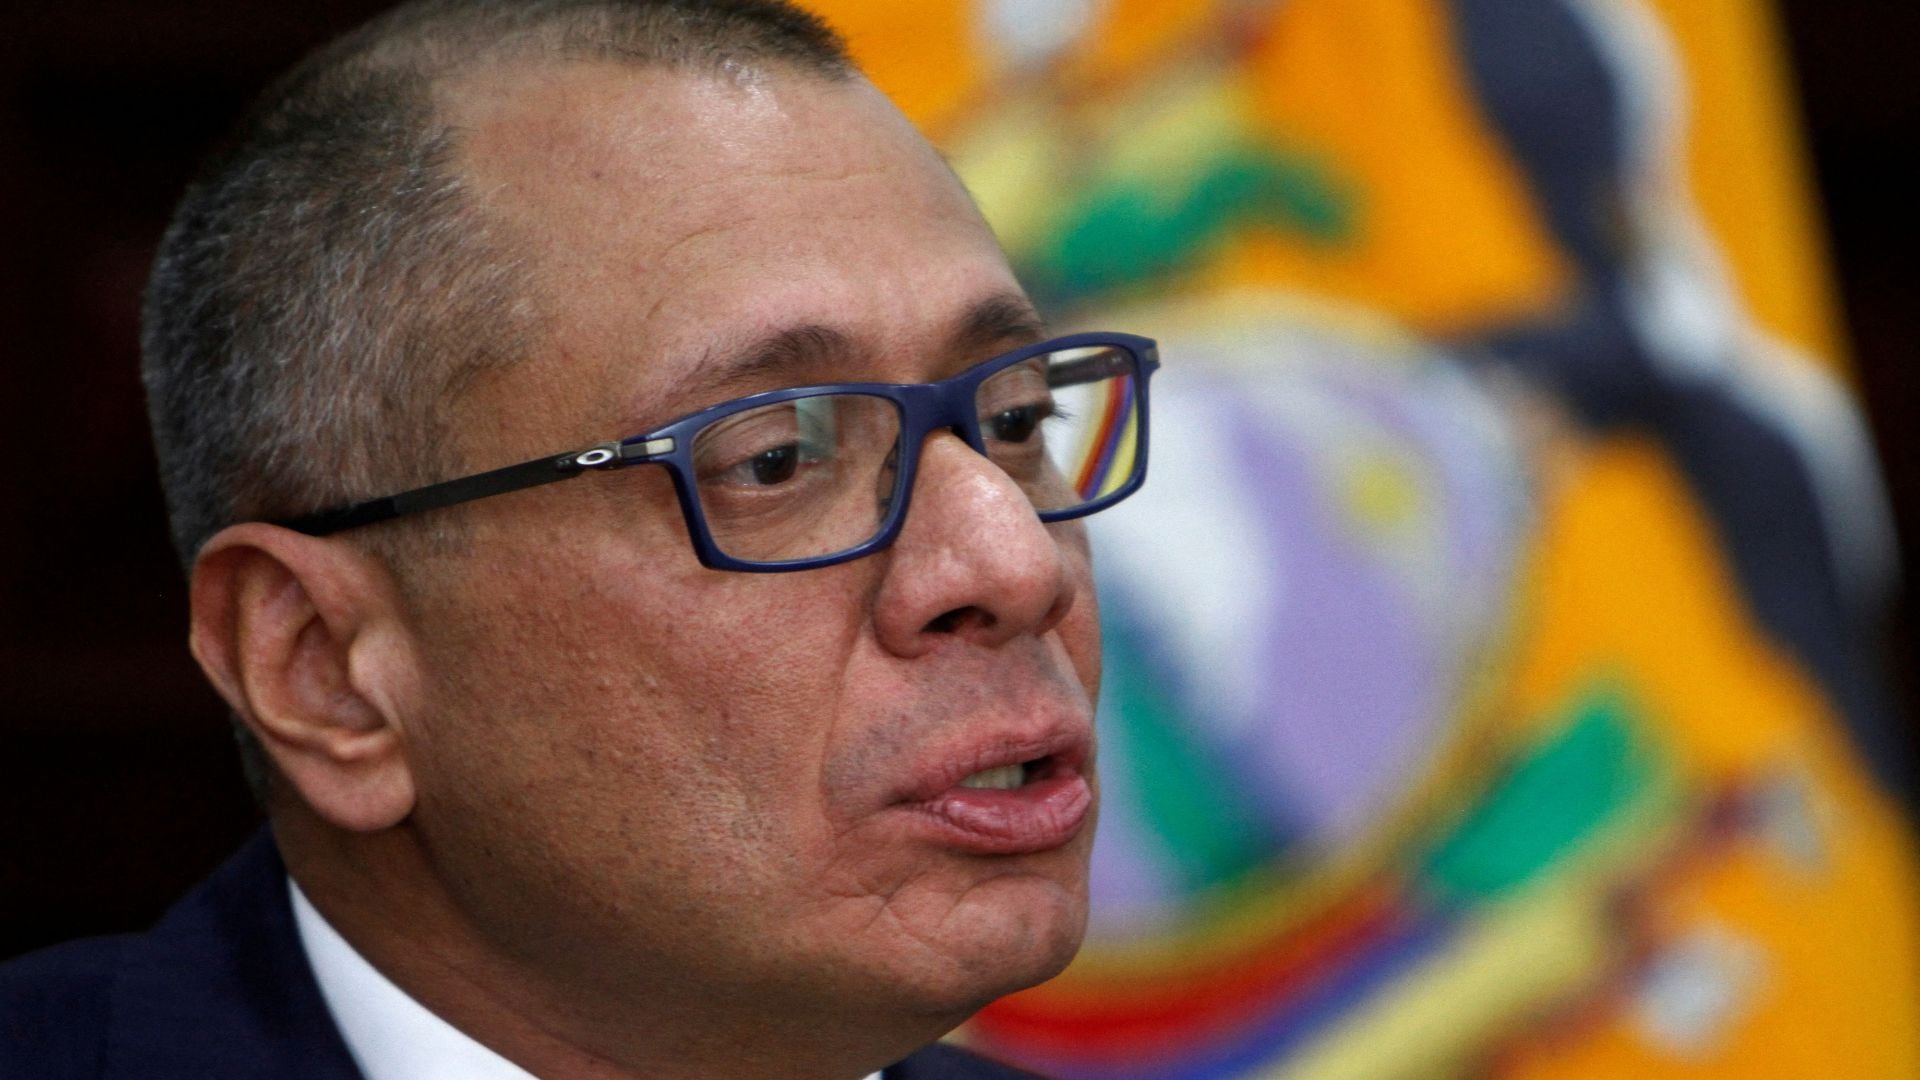 FILE PHOTO: Ecuador's then-Vice President Jorge Glas talks during an interview with Reuters at the Government Palace in Quito, Ecuador, August 29, 2017. REUTERS/Daniel Tapia/File Photo